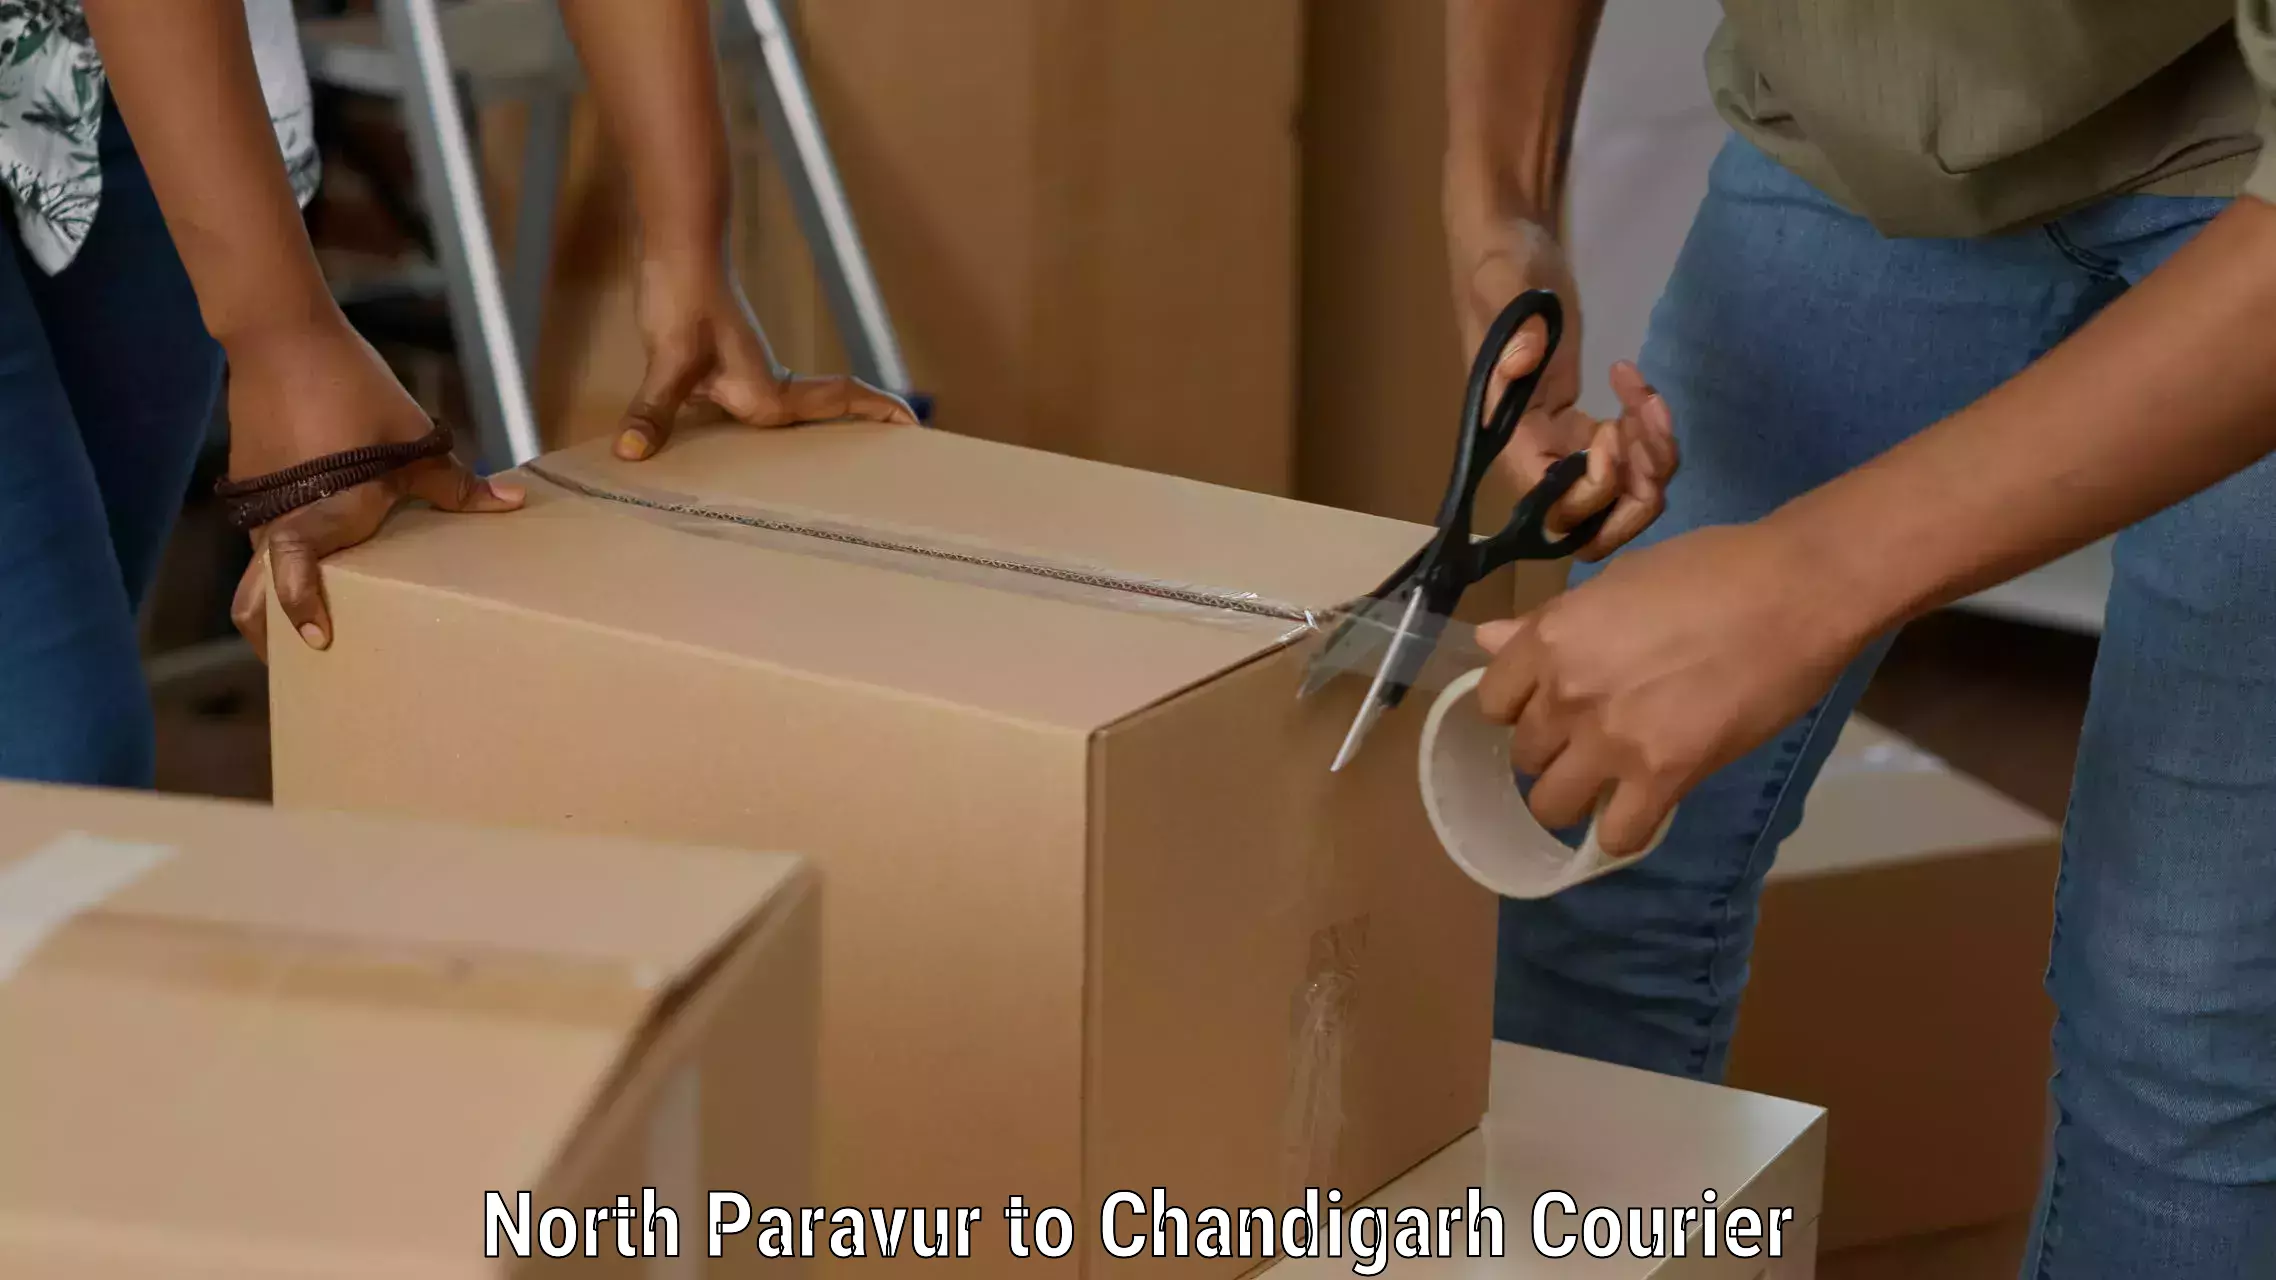 Remote area delivery North Paravur to Chandigarh